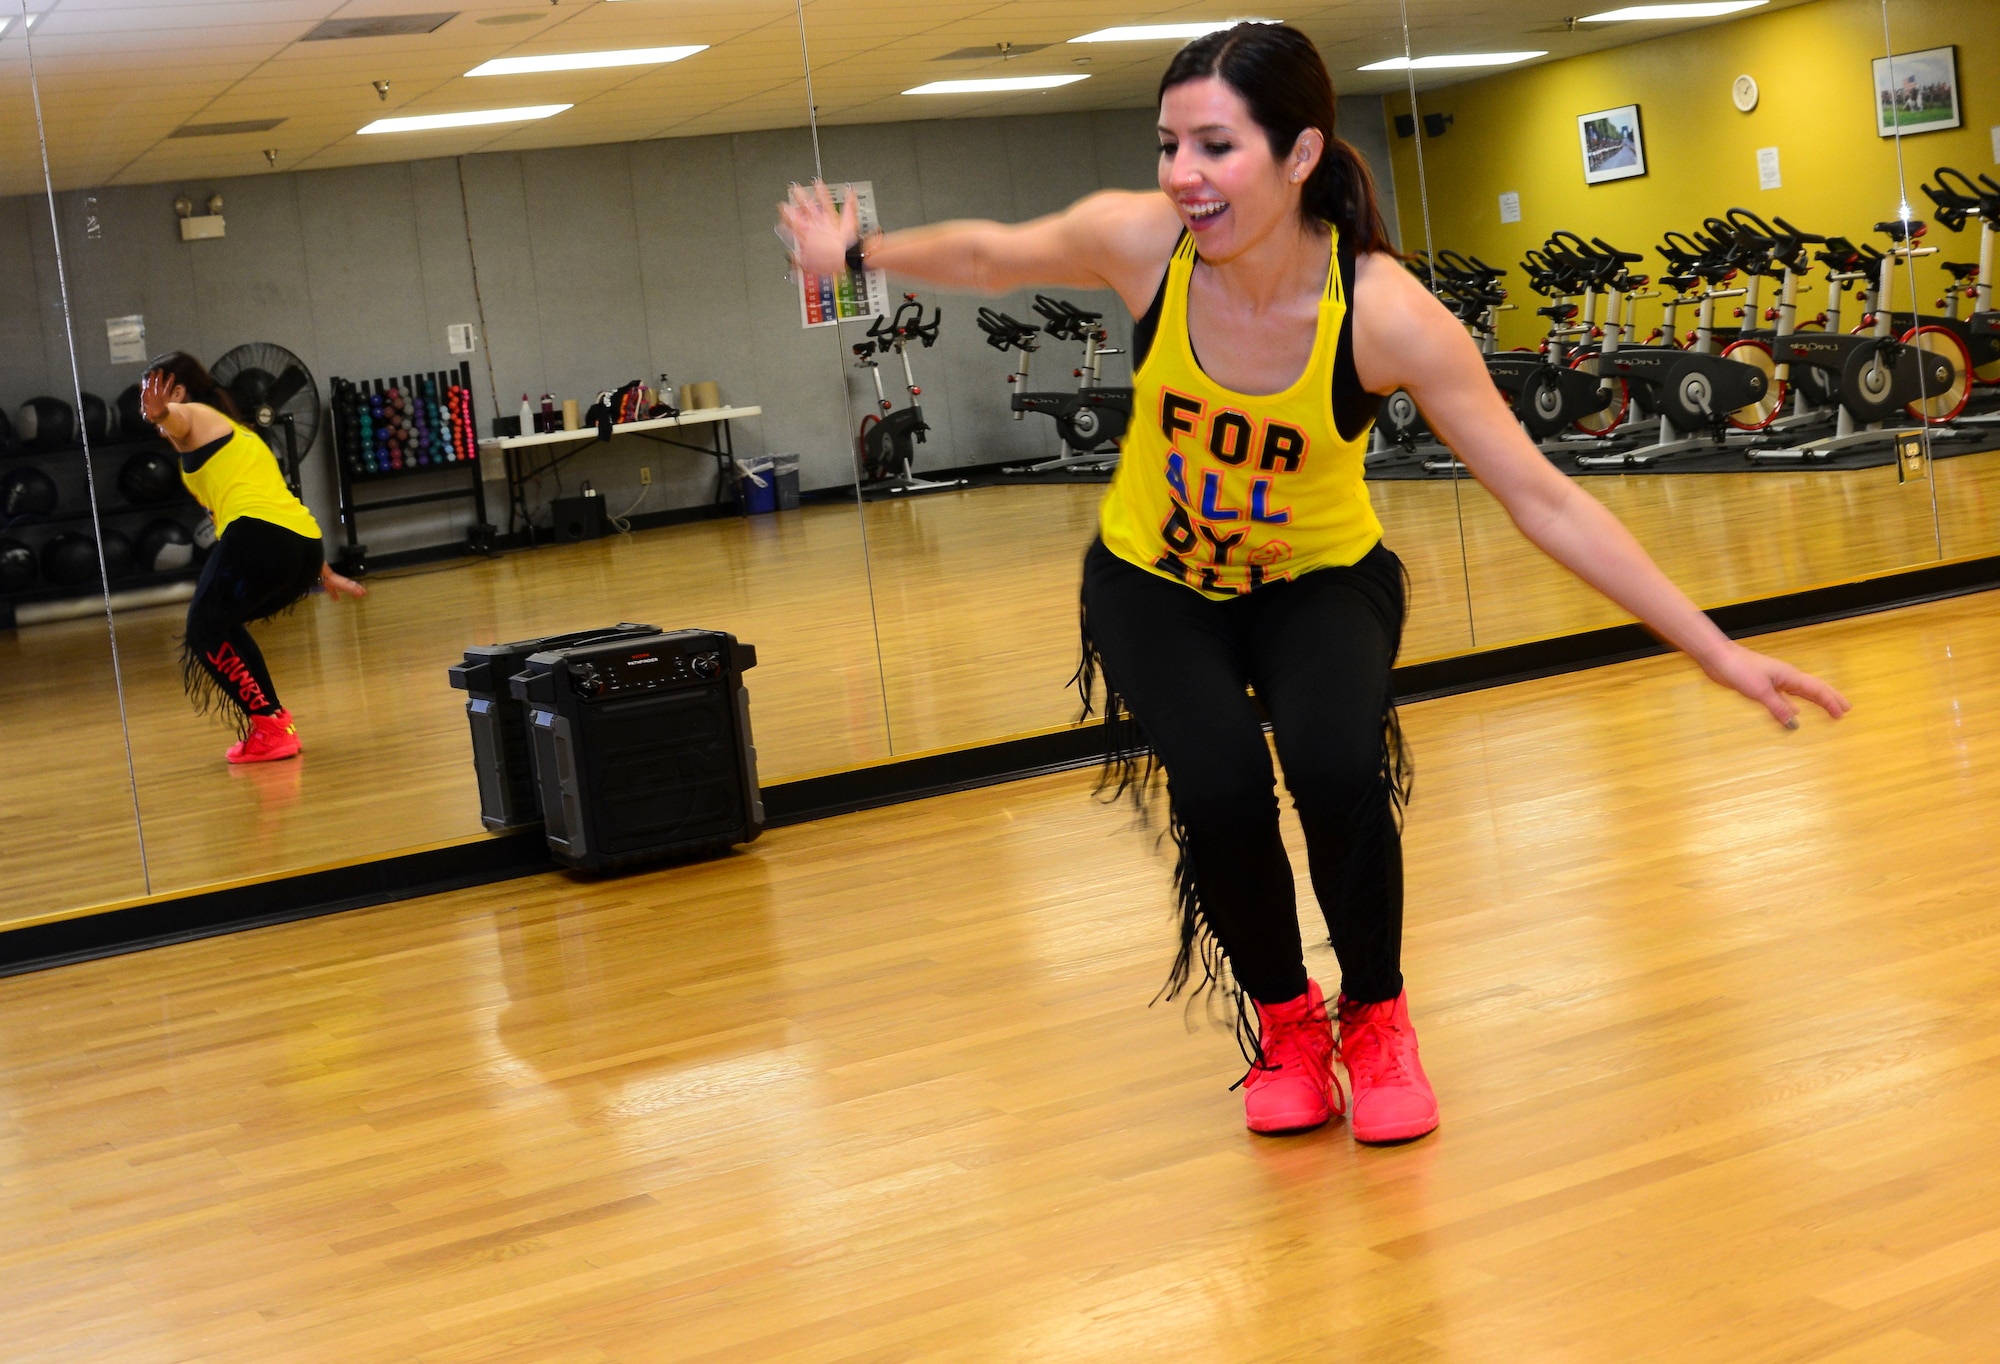 Gabriela Hallada demonstrates a Zumba routine at the Kirtland East Fitness Center Nov. 10. Hallada’s Zumba classes take place Wednesday’s at 5:30 p.m. and (Zumba Strong) Saturdays at 9 a.m. in the cardio room of the East Fitness Center. The classes are free to anyone with base access. (U.S. Air Force photo by Jessie Perkins)